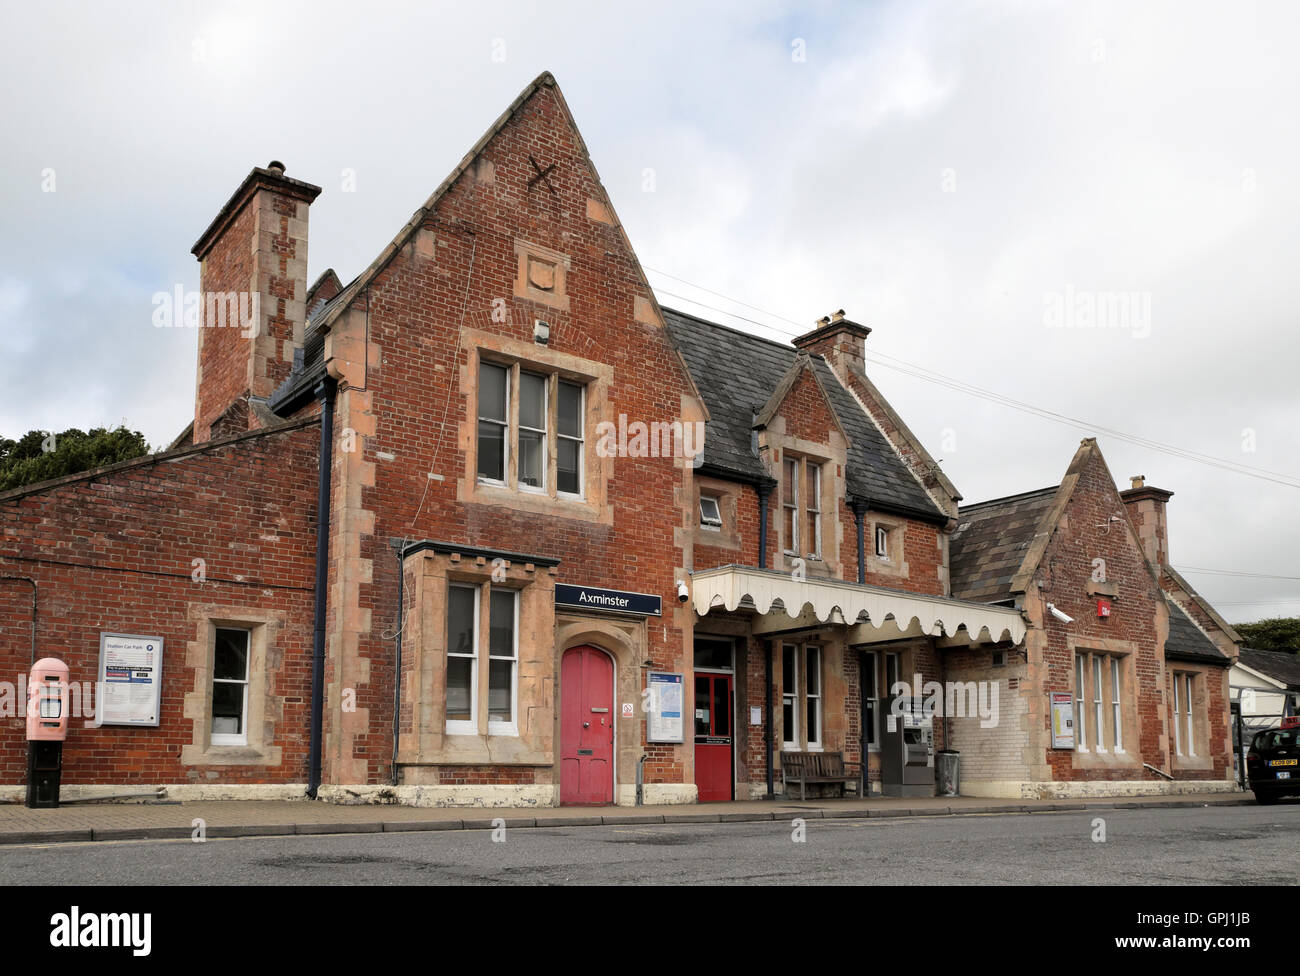 Exterior view of Axminster Railway Station designed by architect William Tite in 1860  in Devon, England UK   KATHY DEWITT Stock Photo